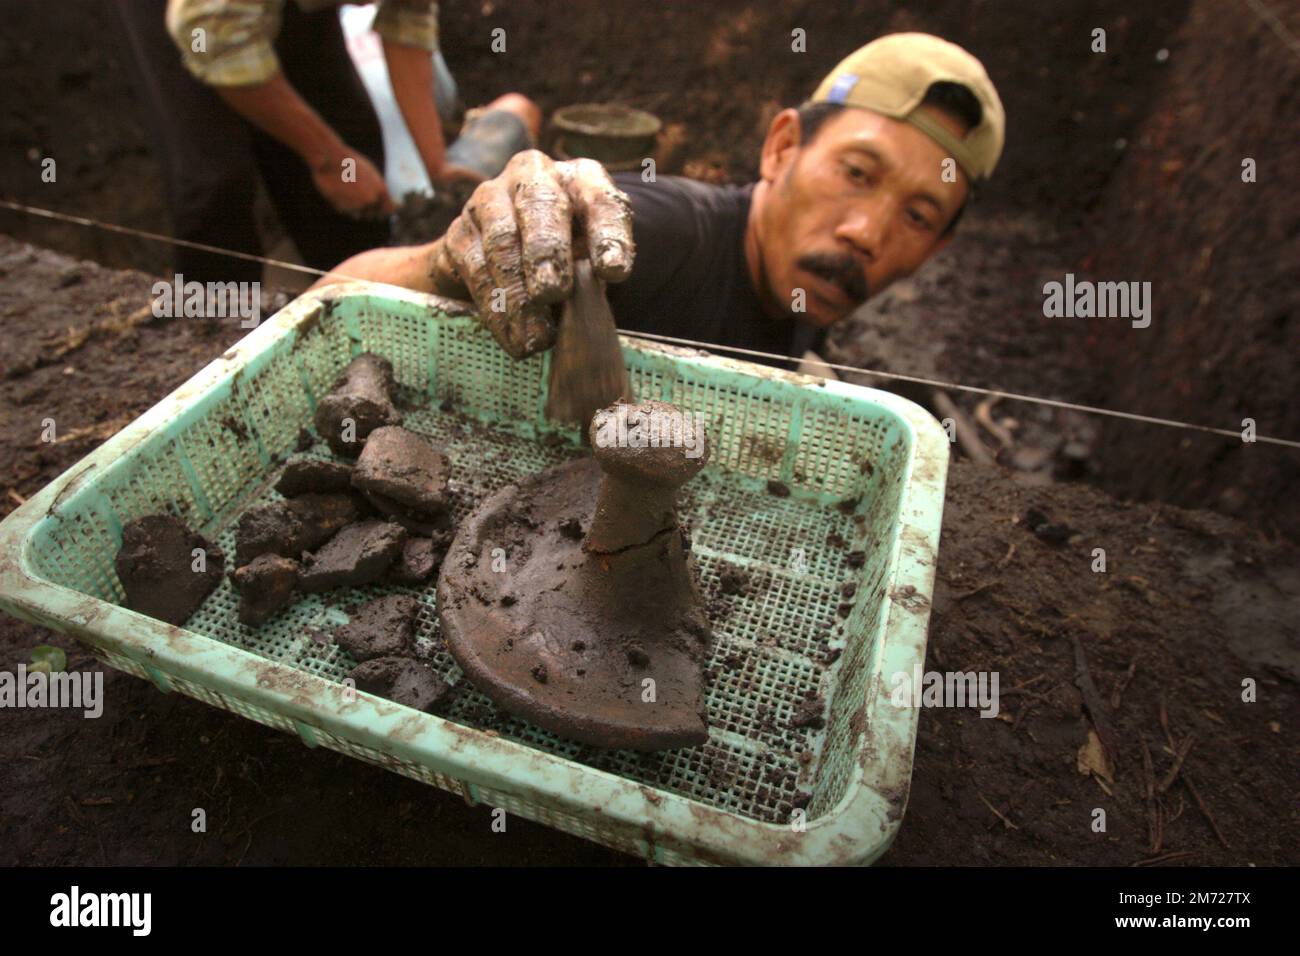 A worker collecting pottery fragments during the excavation  of prehistoric burial site conducted by the Indonesia's National Archaeology Research in Tempuran, Karawang, West Java, Indonesia. Stock Photo